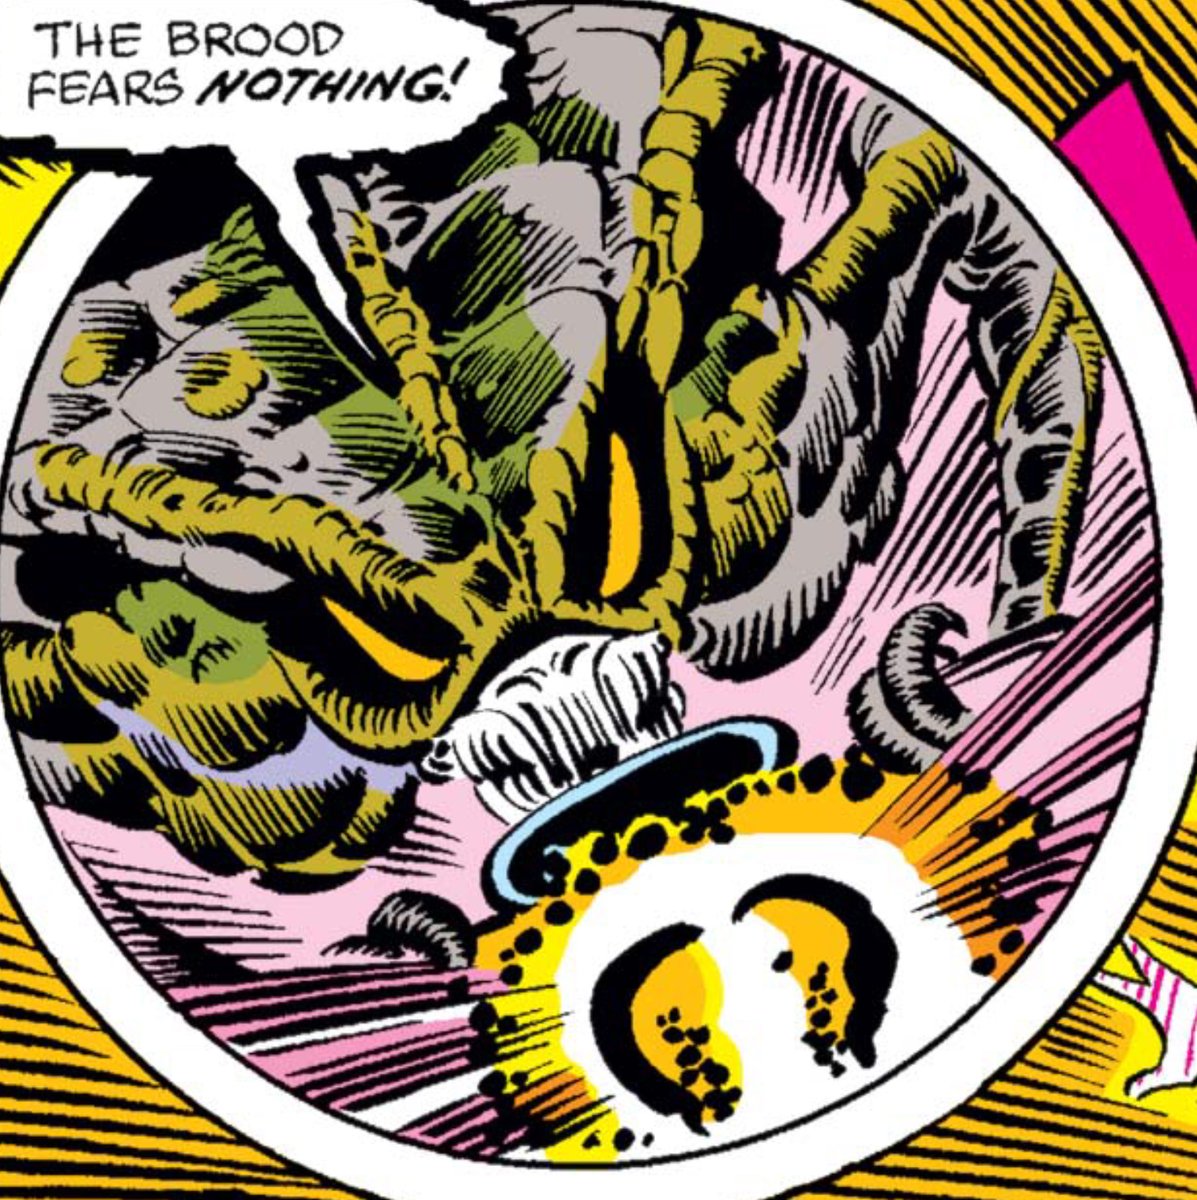 We ultimately learn that Lilandra has been captured and removed from the throne, setting up the more plot-heavy end of these issues, as the Shi'ar ministers set forth an ultimatum: recover the Empress or watch as Earth is destroyed. One cue, we meet the dreaded Brood.